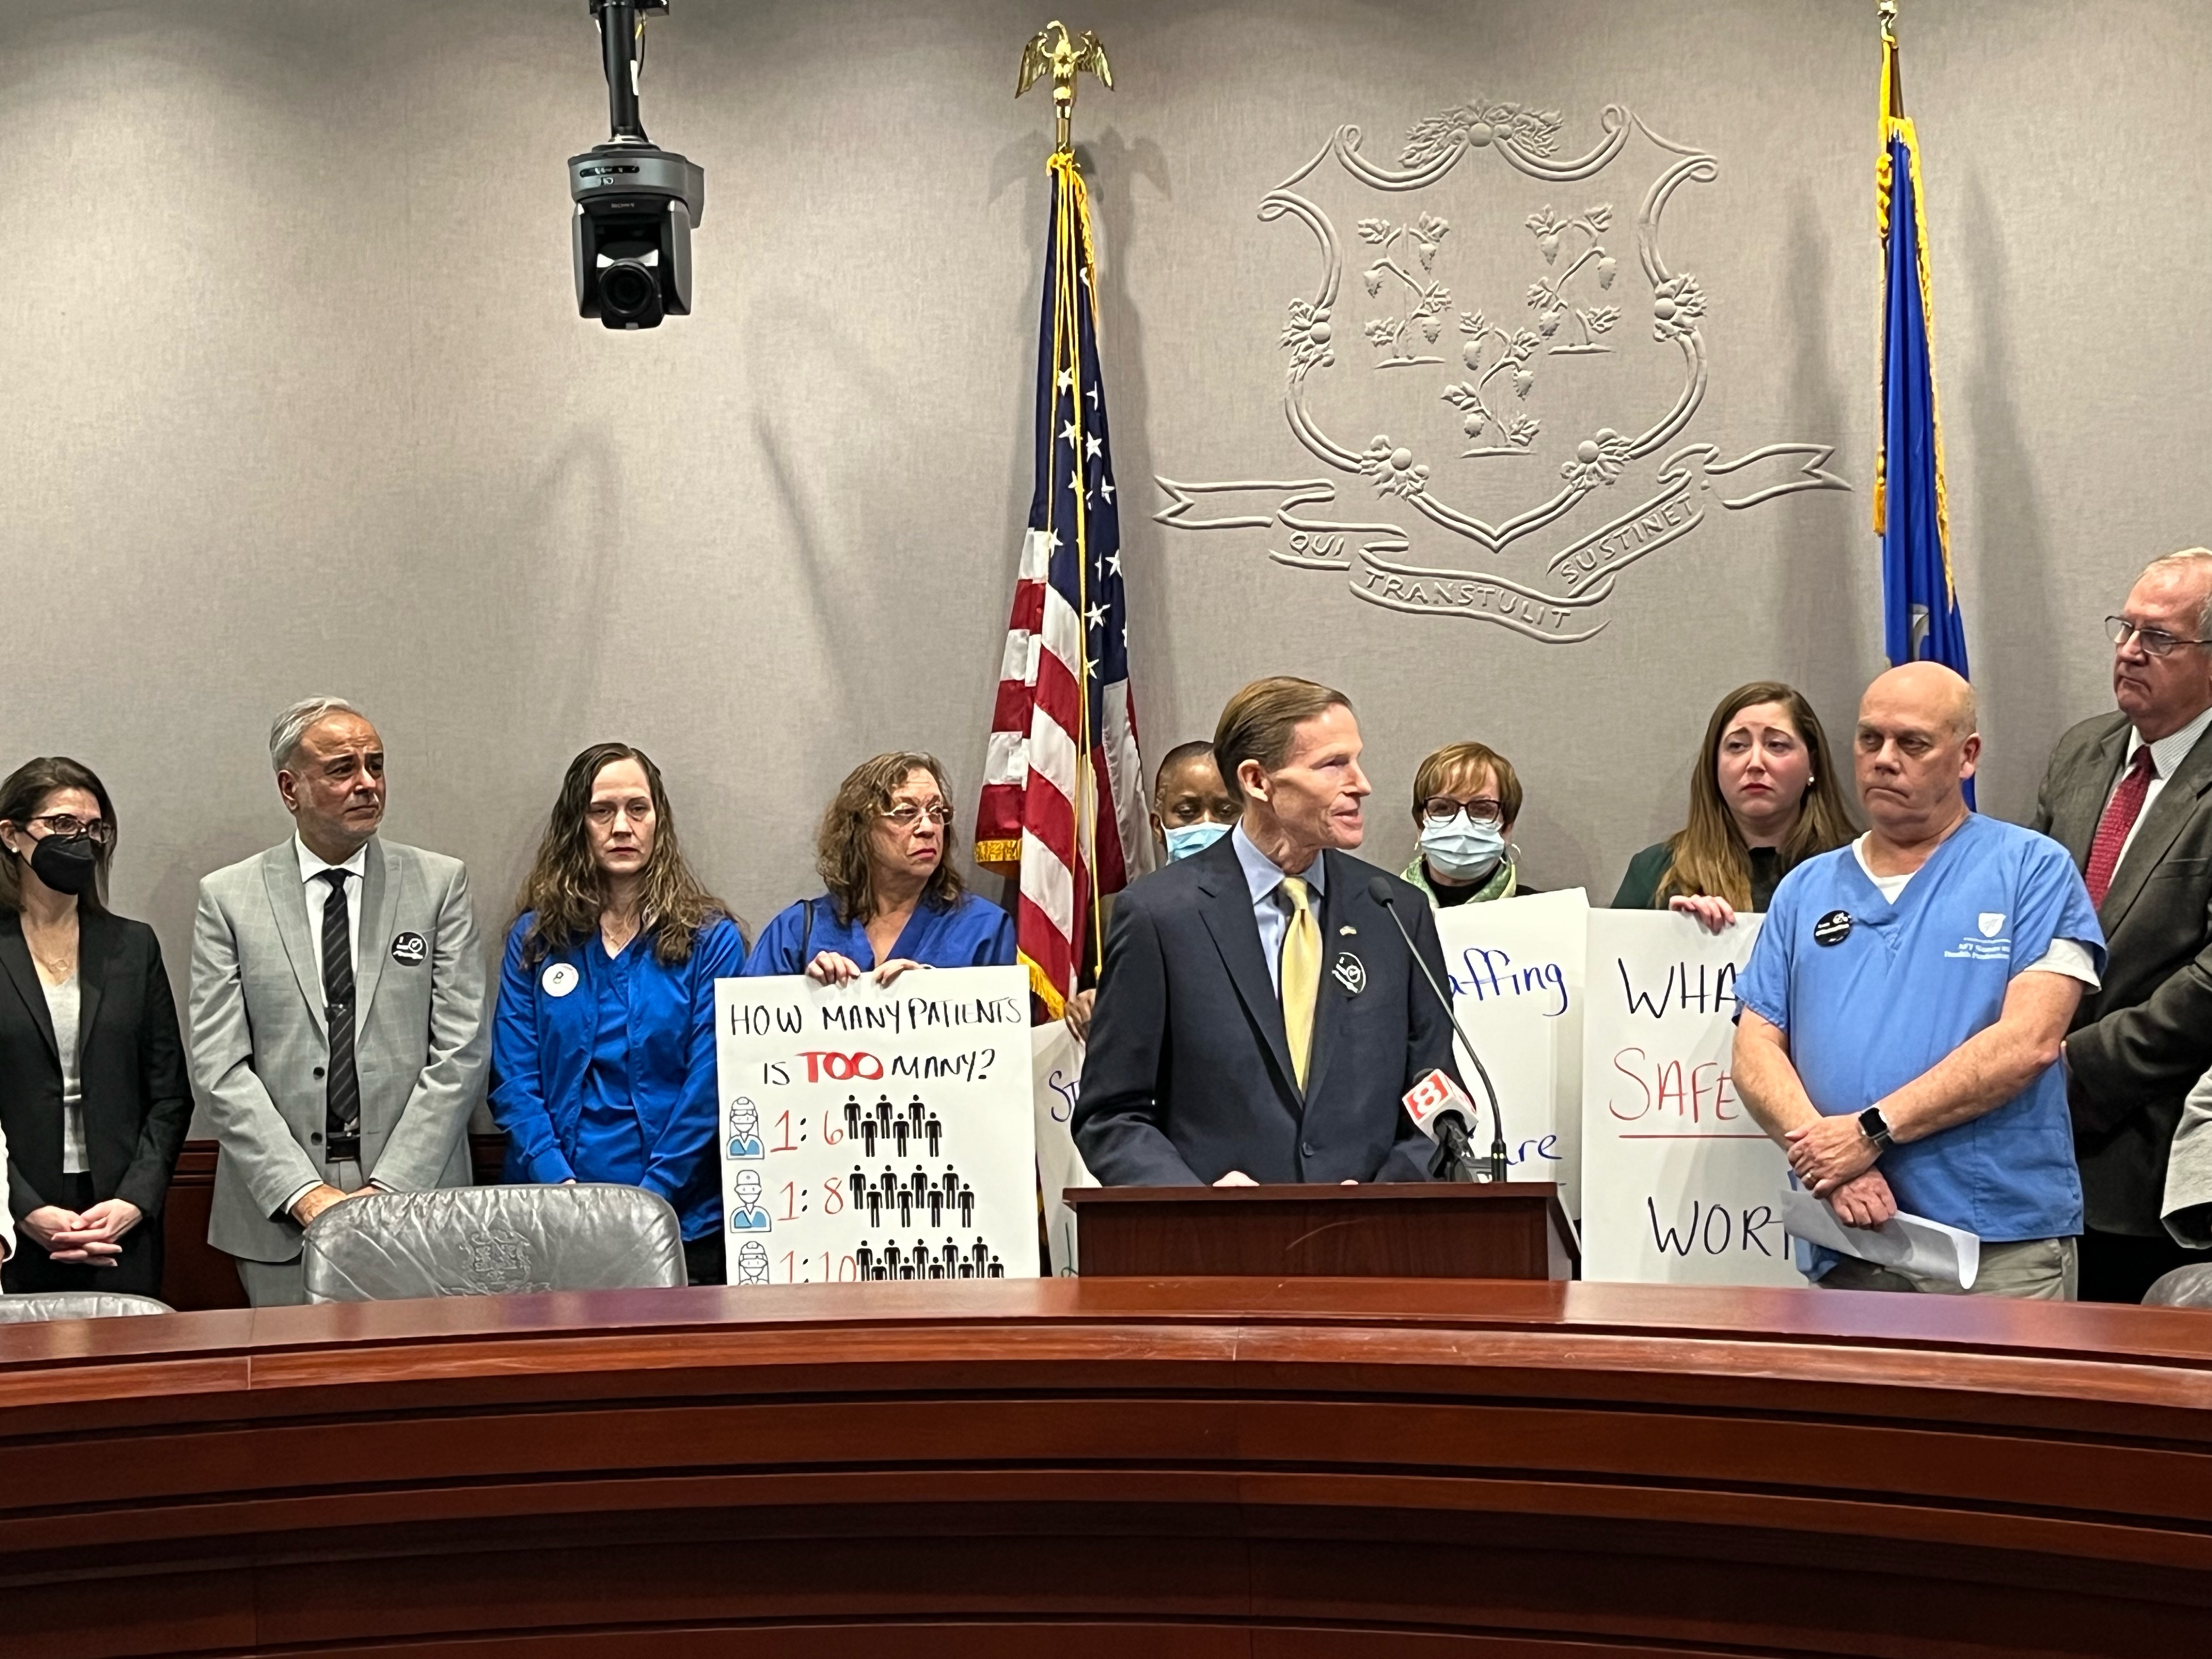 Blumenthal joined health care workers at a press conference to discuss the importance of safe staffing levels.